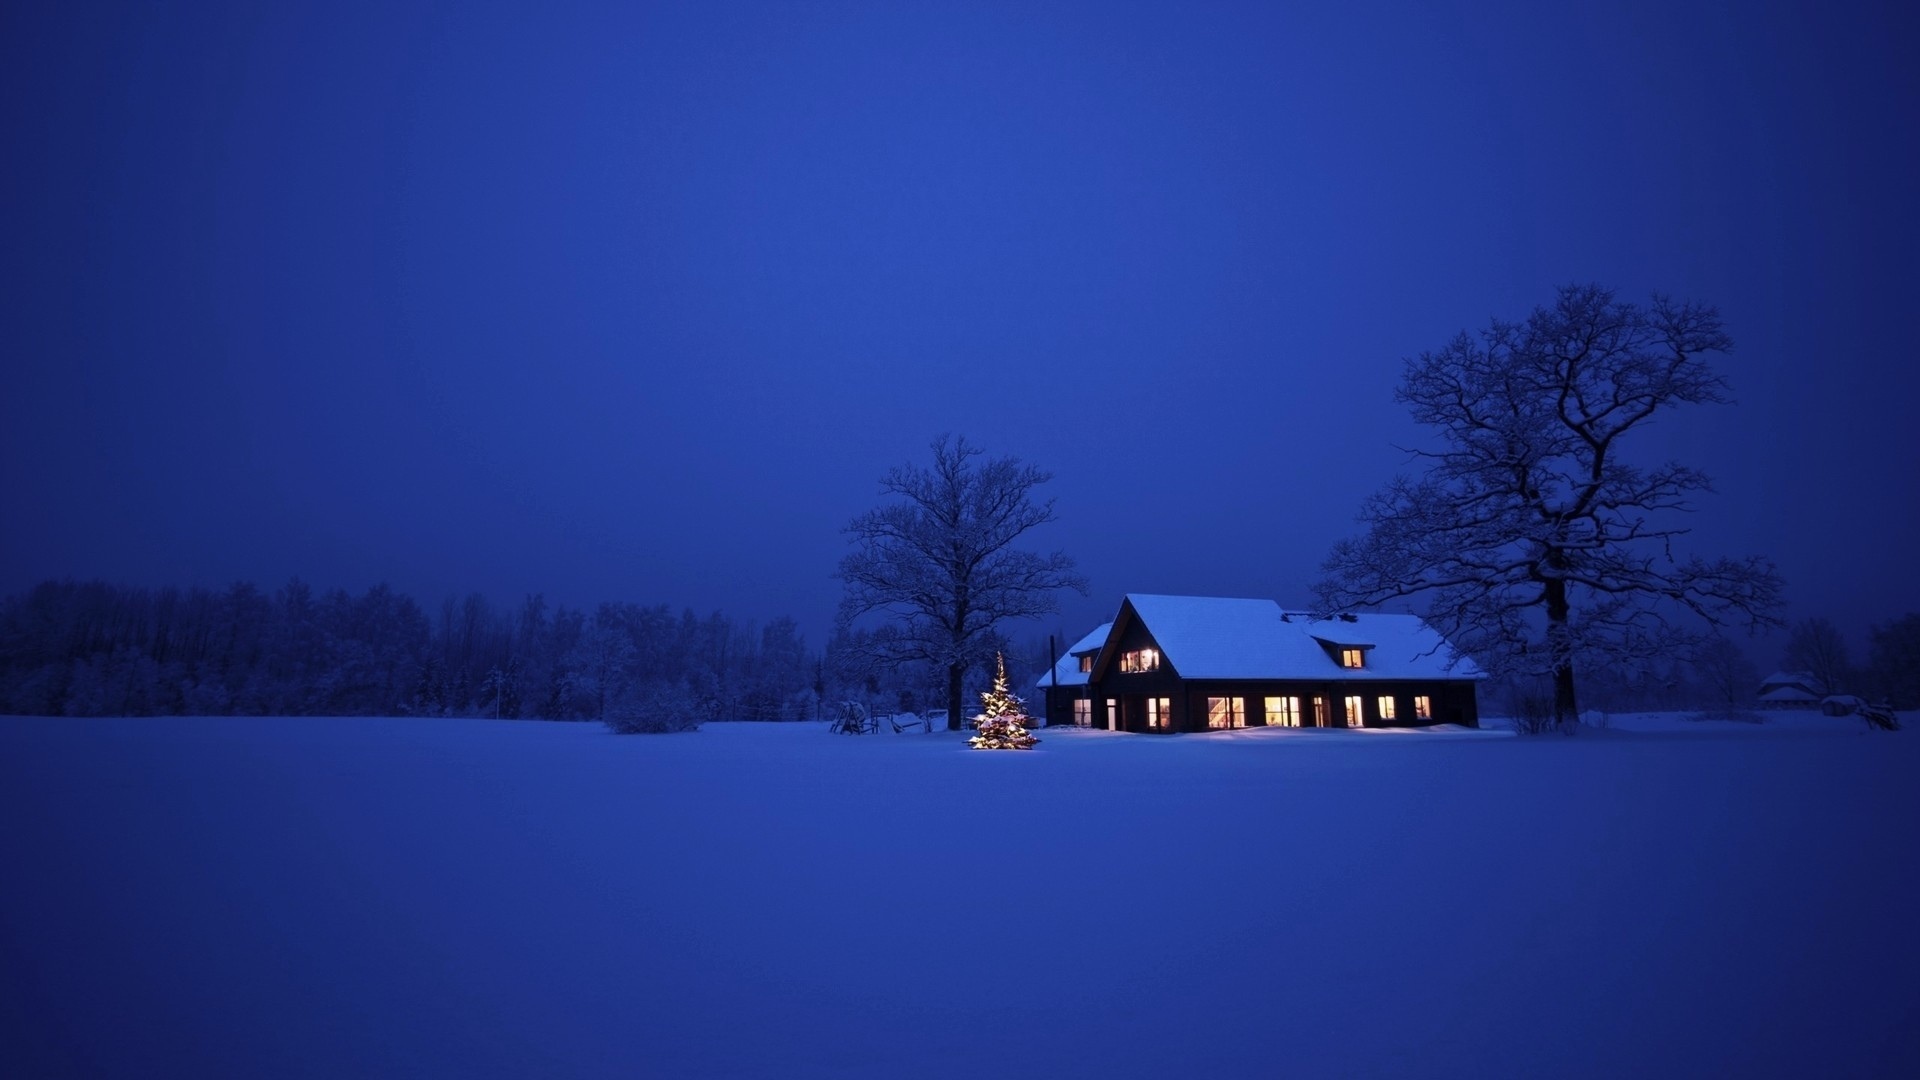 snow, christmas xmas, houses, new year, landscape, holidays, winter, blue images